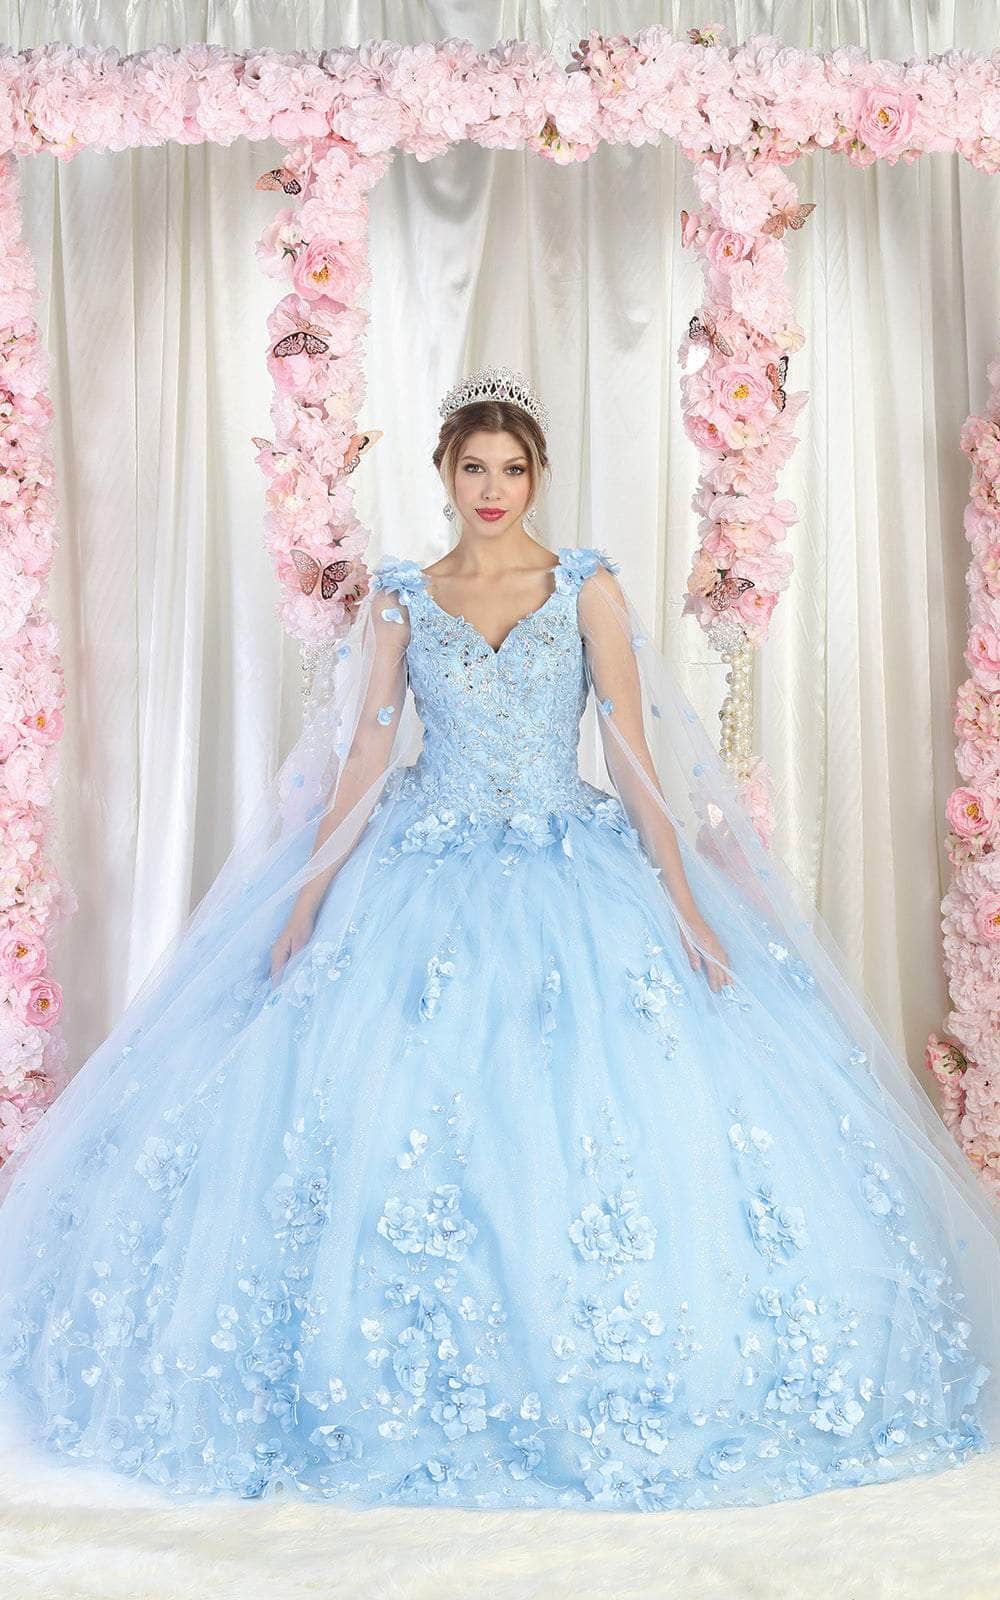 May Queen LK199 - Floral-Detailed Quinceanera Gown Special Occasion Dress